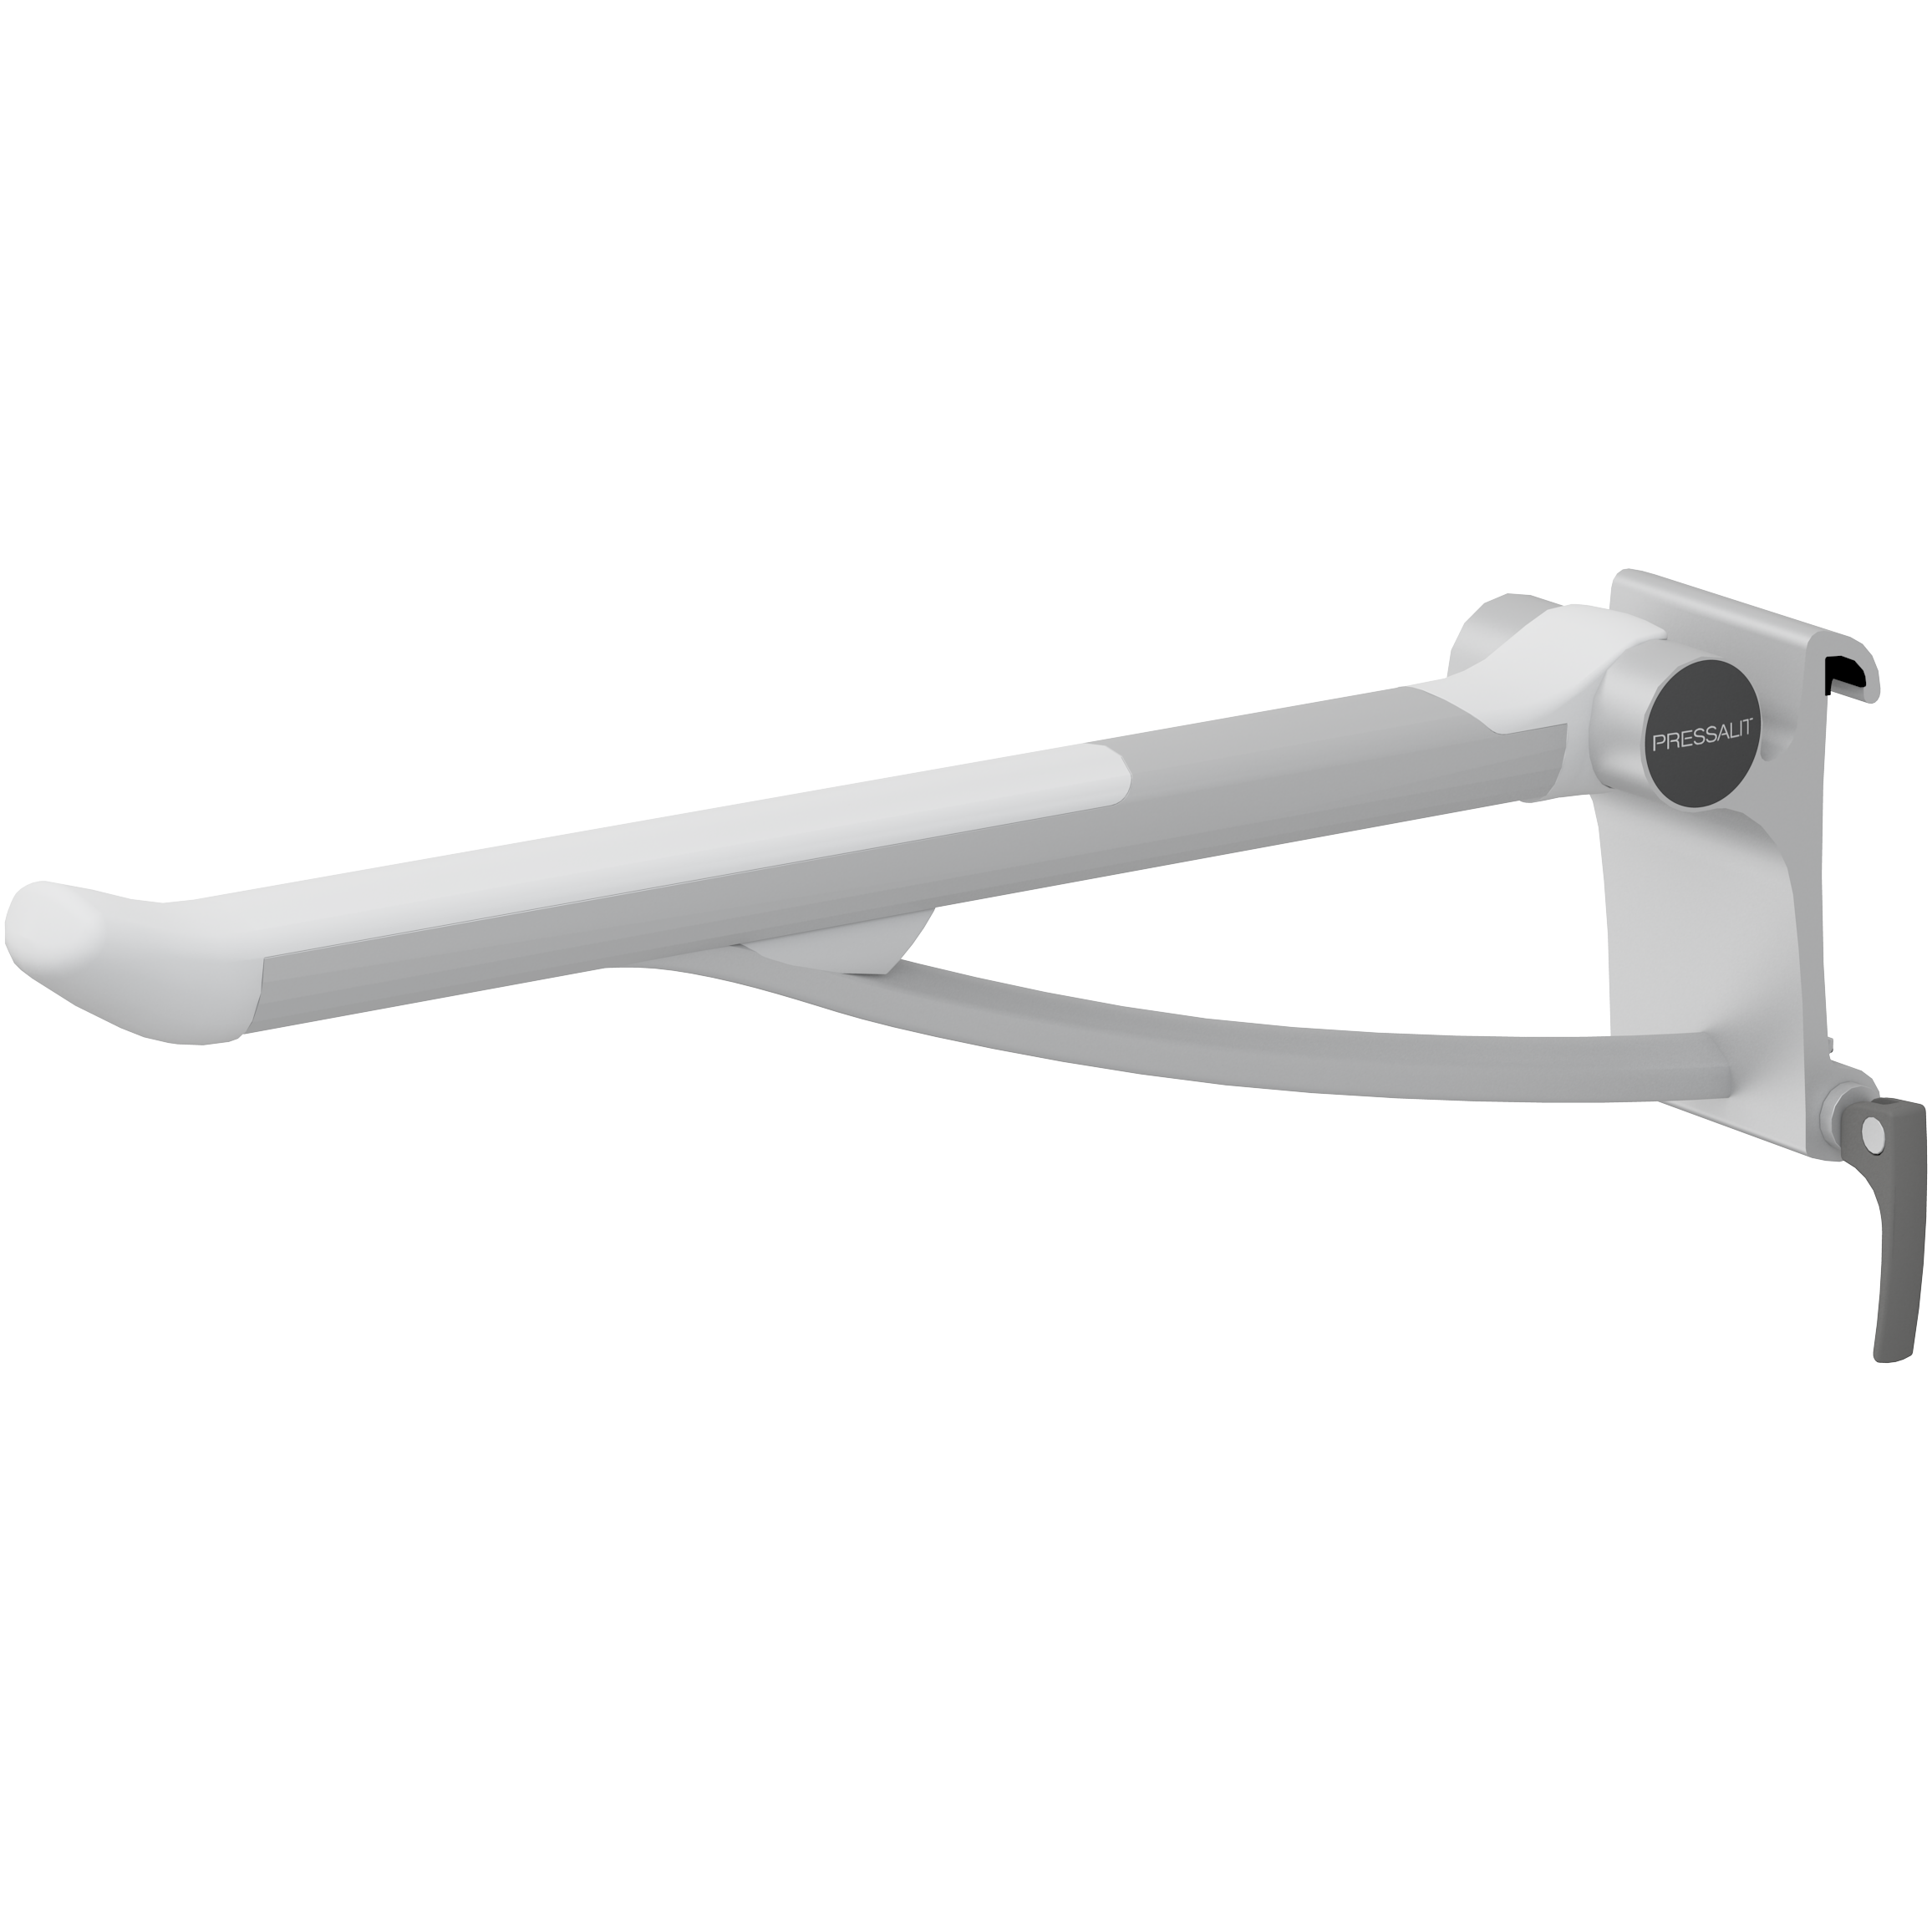 PLUS support arm, 700 mm